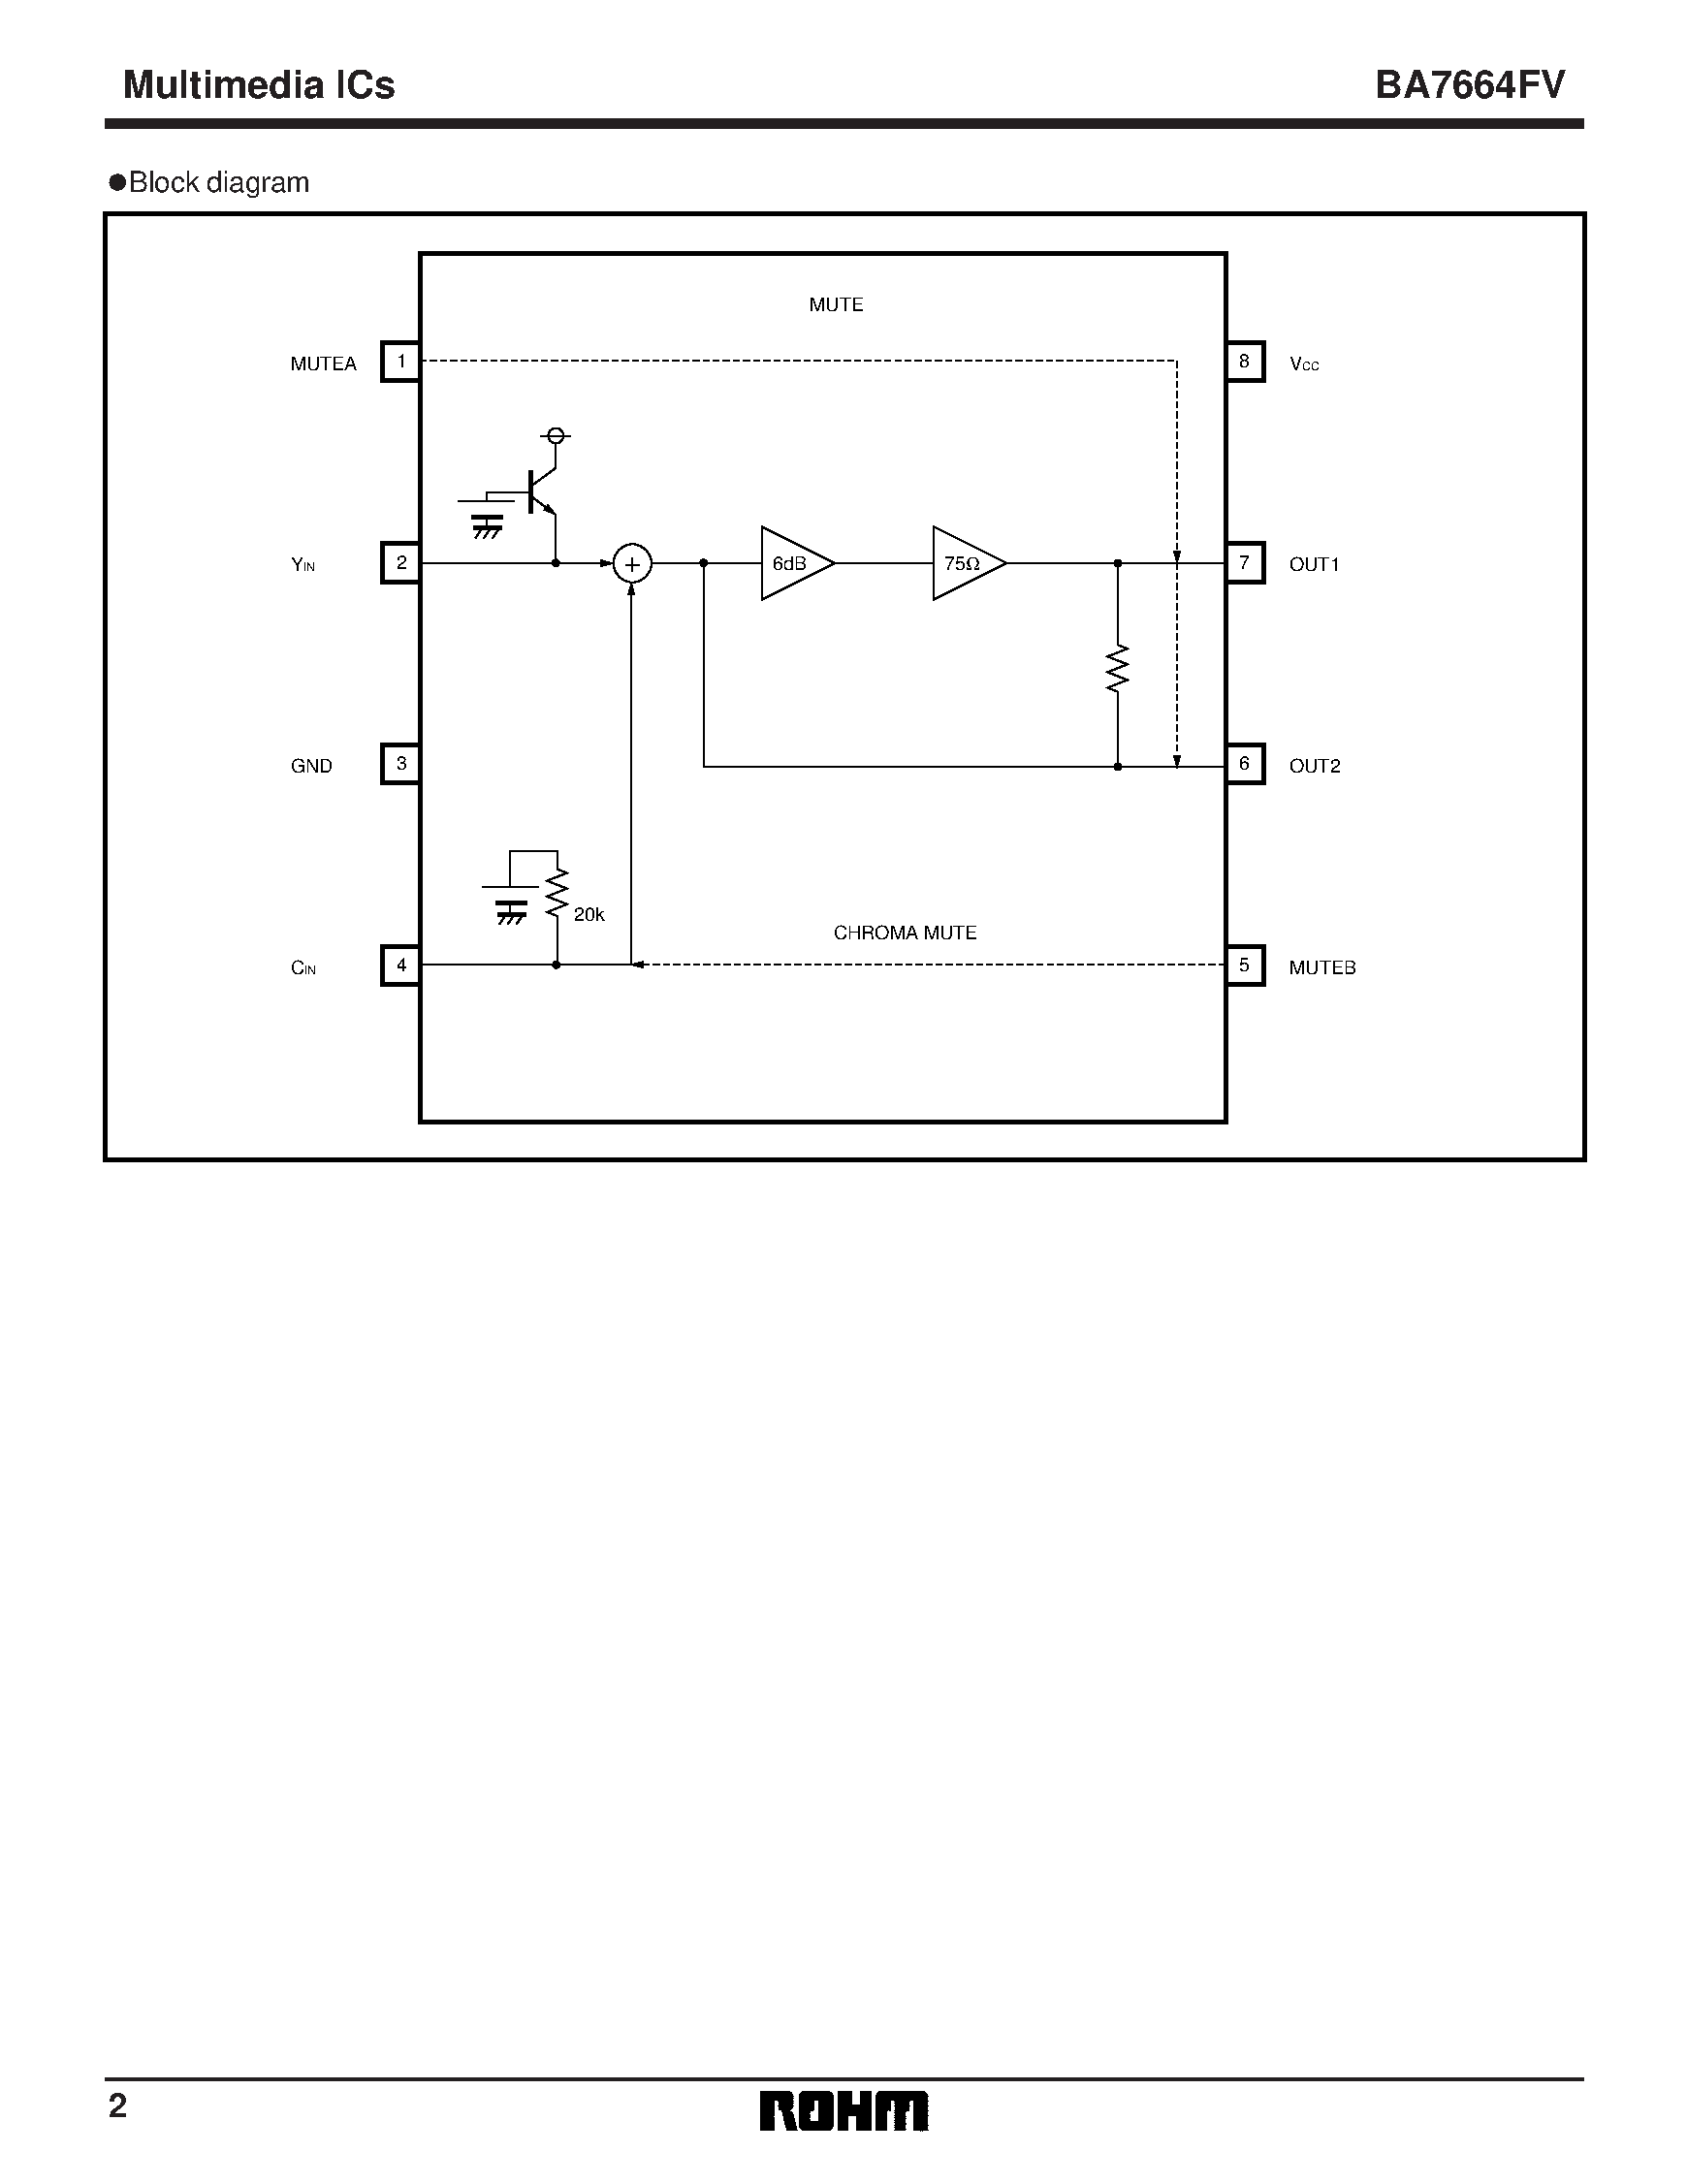 Datasheet BA7664 - 75 driver with Y / C MIX circuit page 2